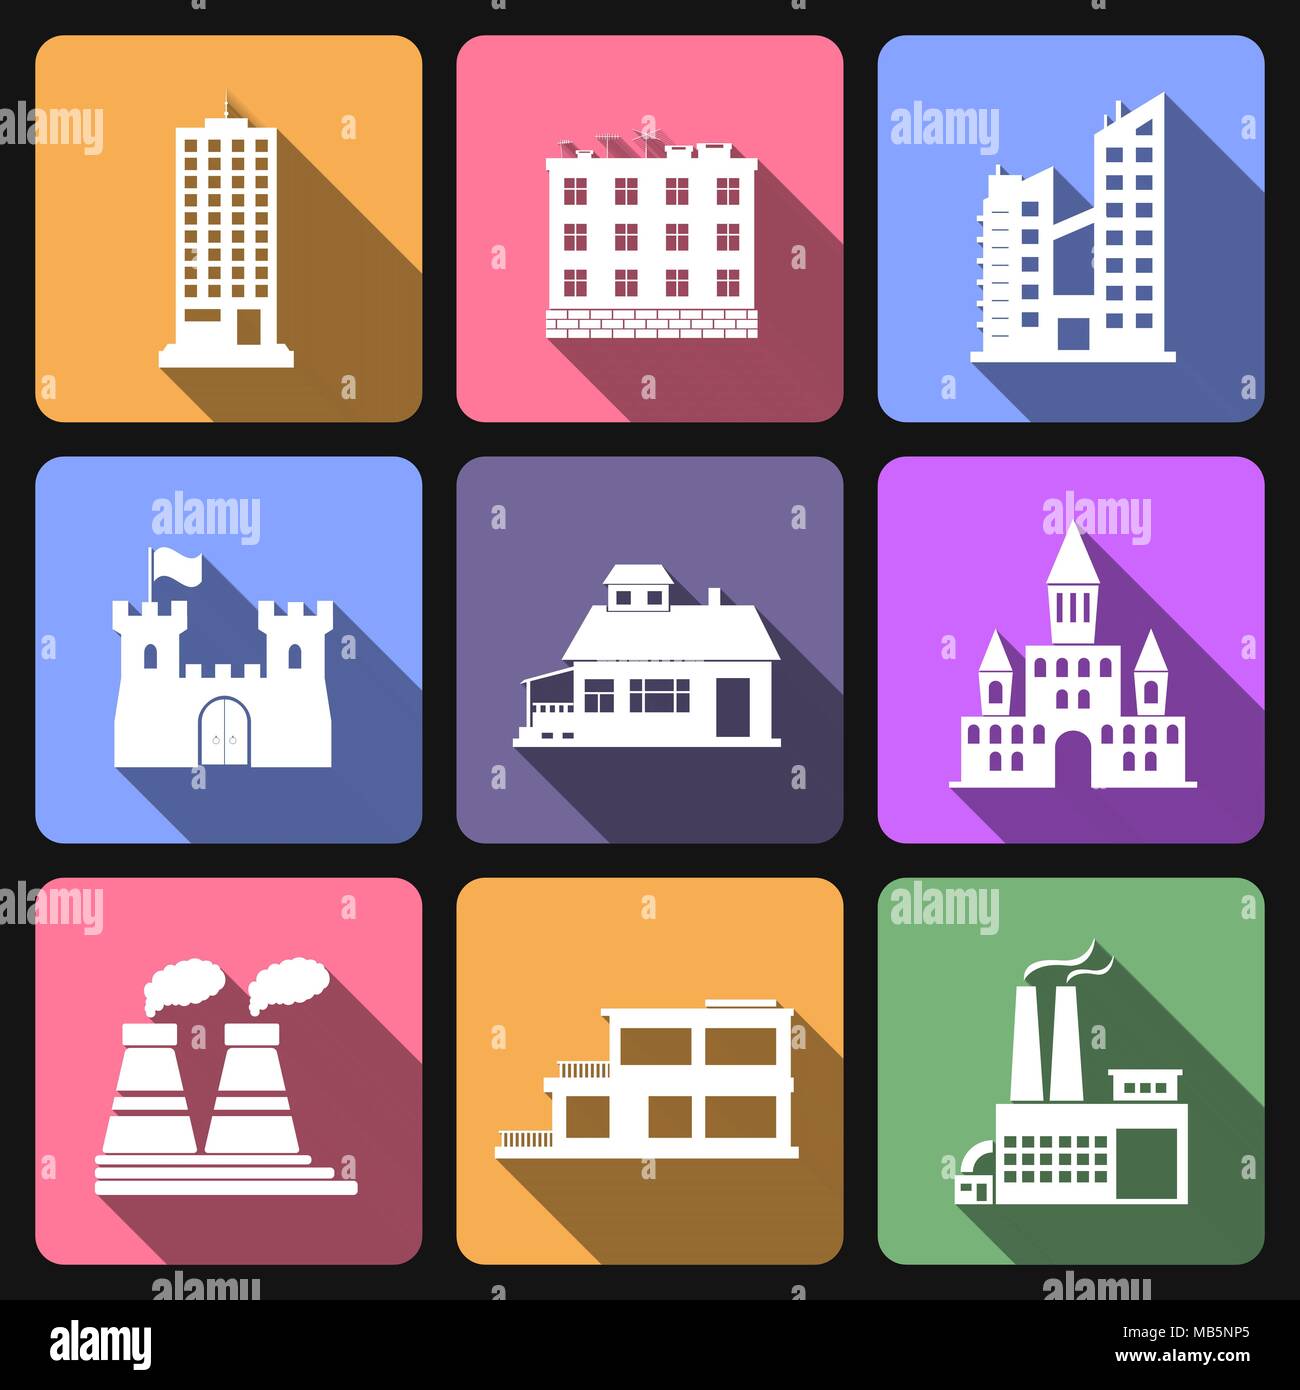 Building flat icons vector set Stock Vector